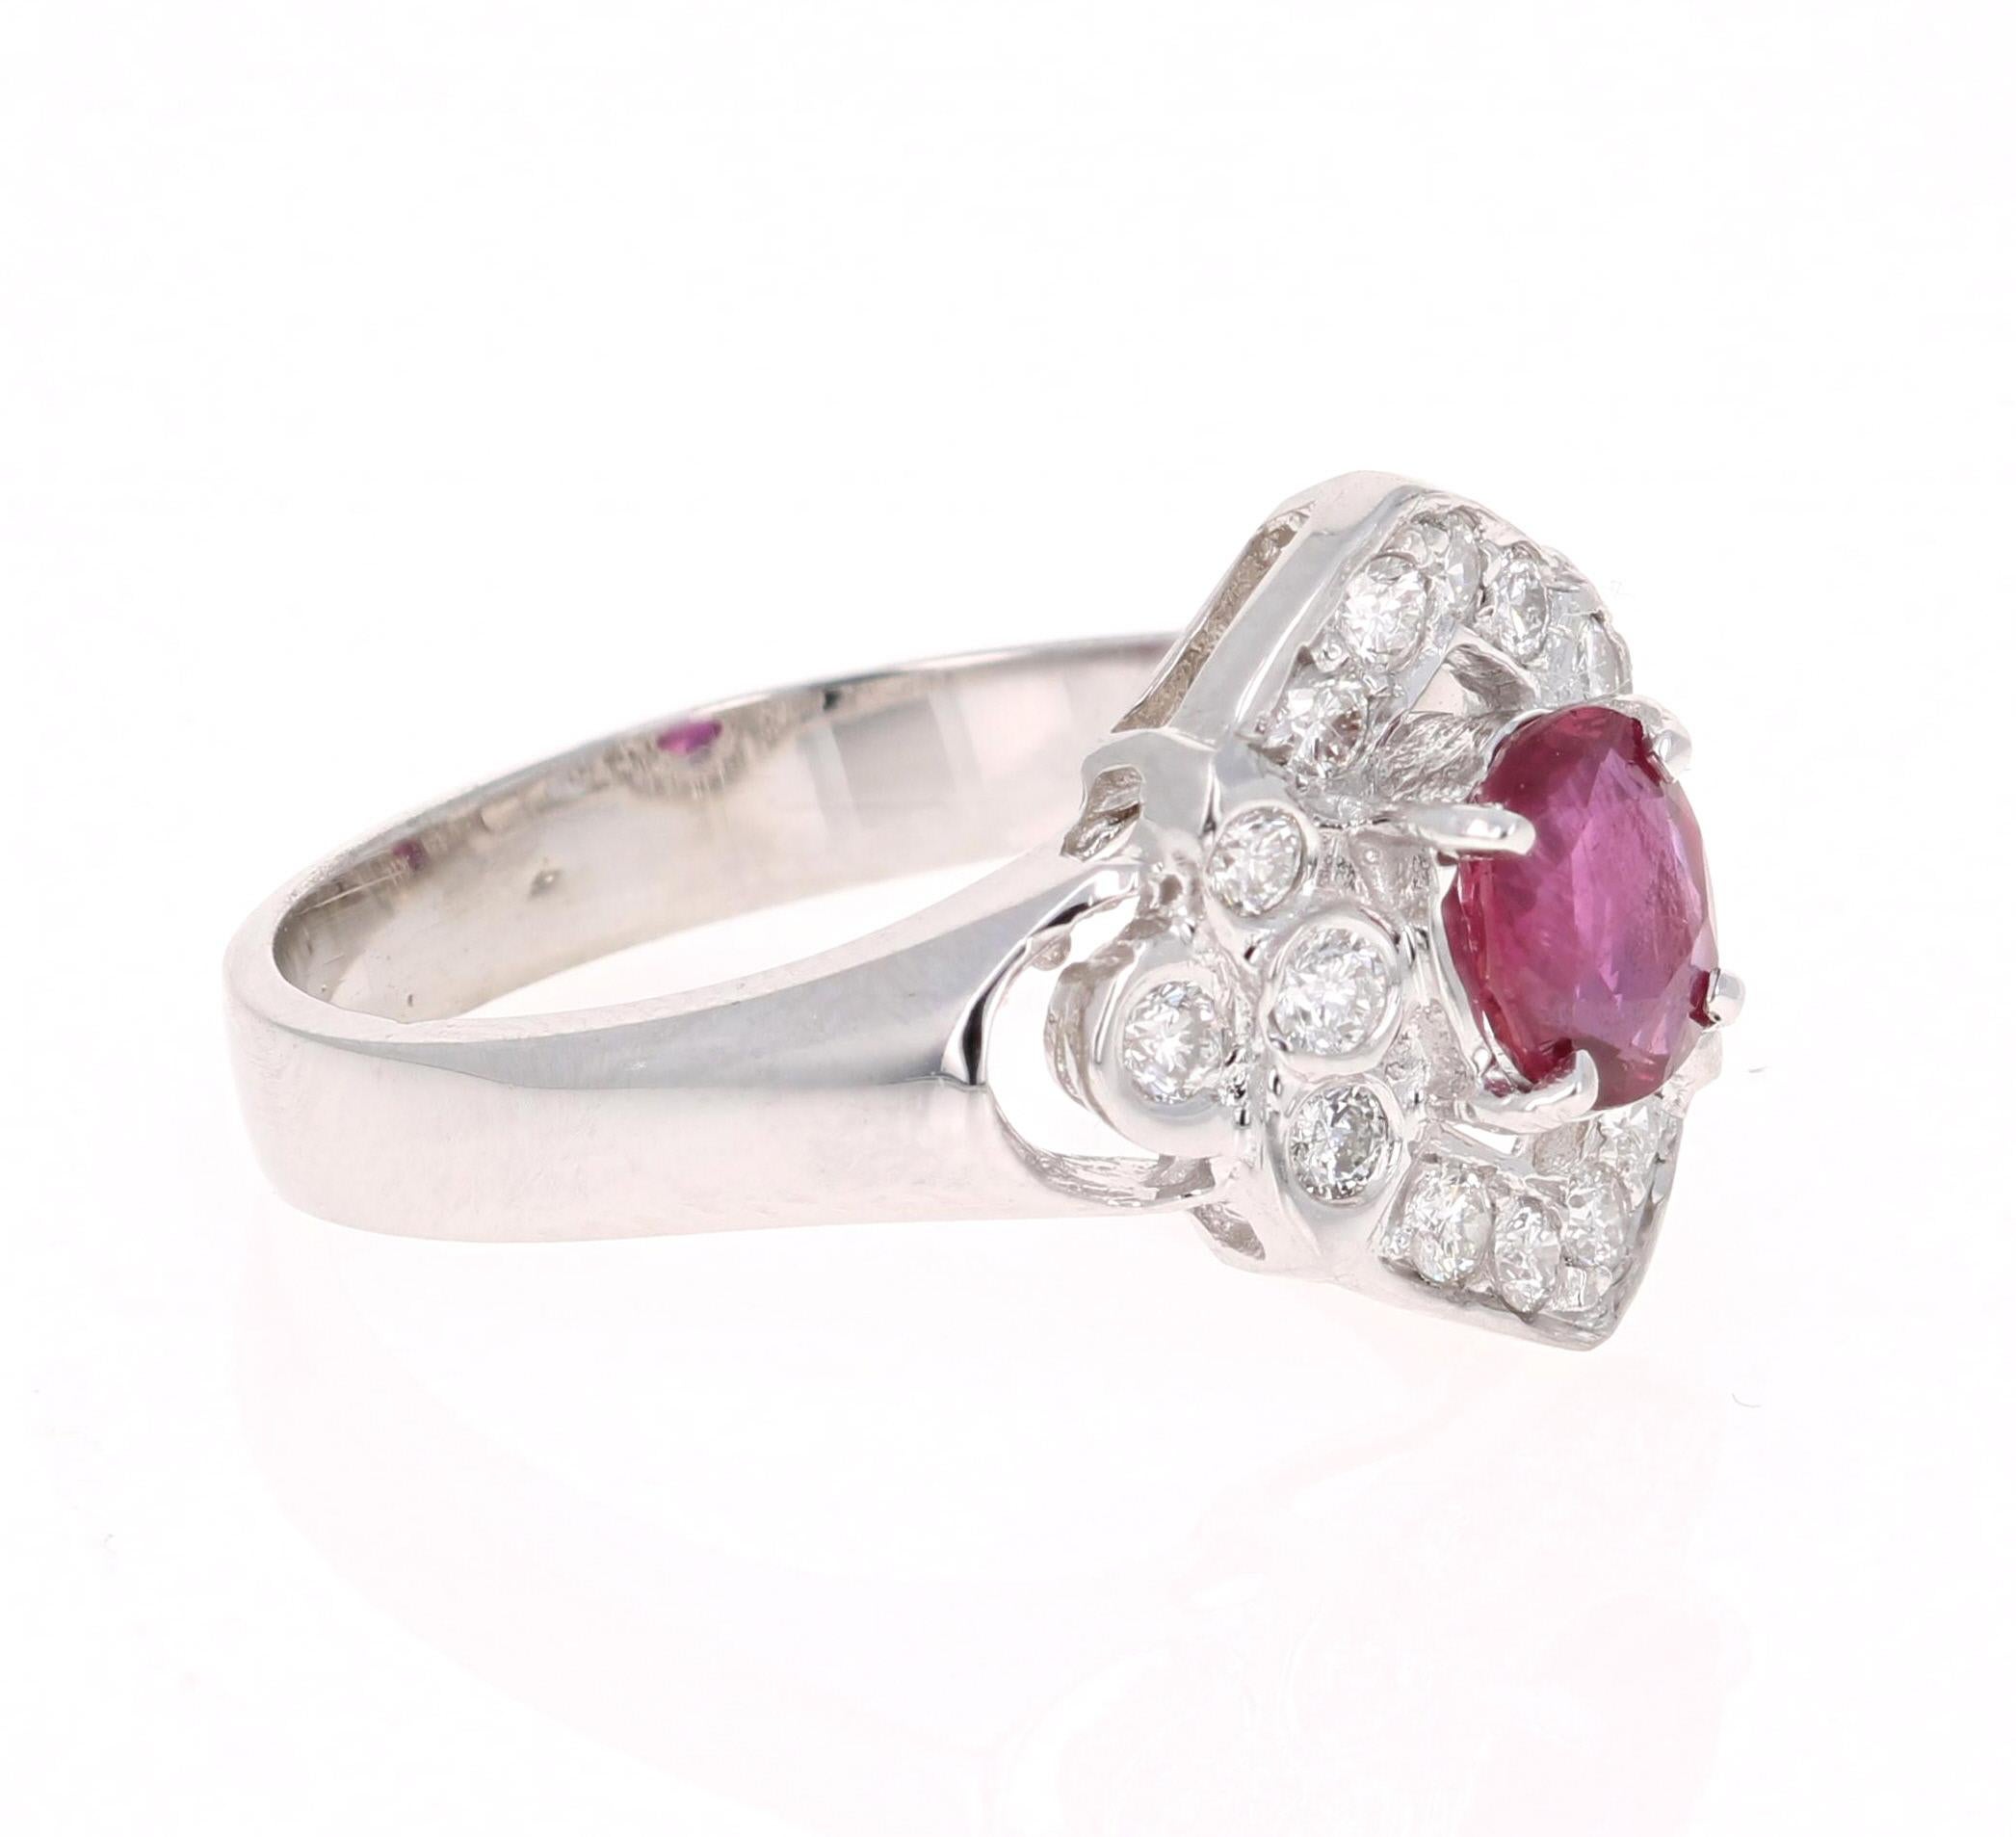 Simply beautiful Ruby Diamond Ring with a Oval Cut 0.65 Carat Burmese Ruby which is surrounded by 28 Round Cut Diamonds that weigh 0.35 carats. The total carat weight of the ring is 1.00 carats. The clarity and color of the diamonds are SI1-F.

The